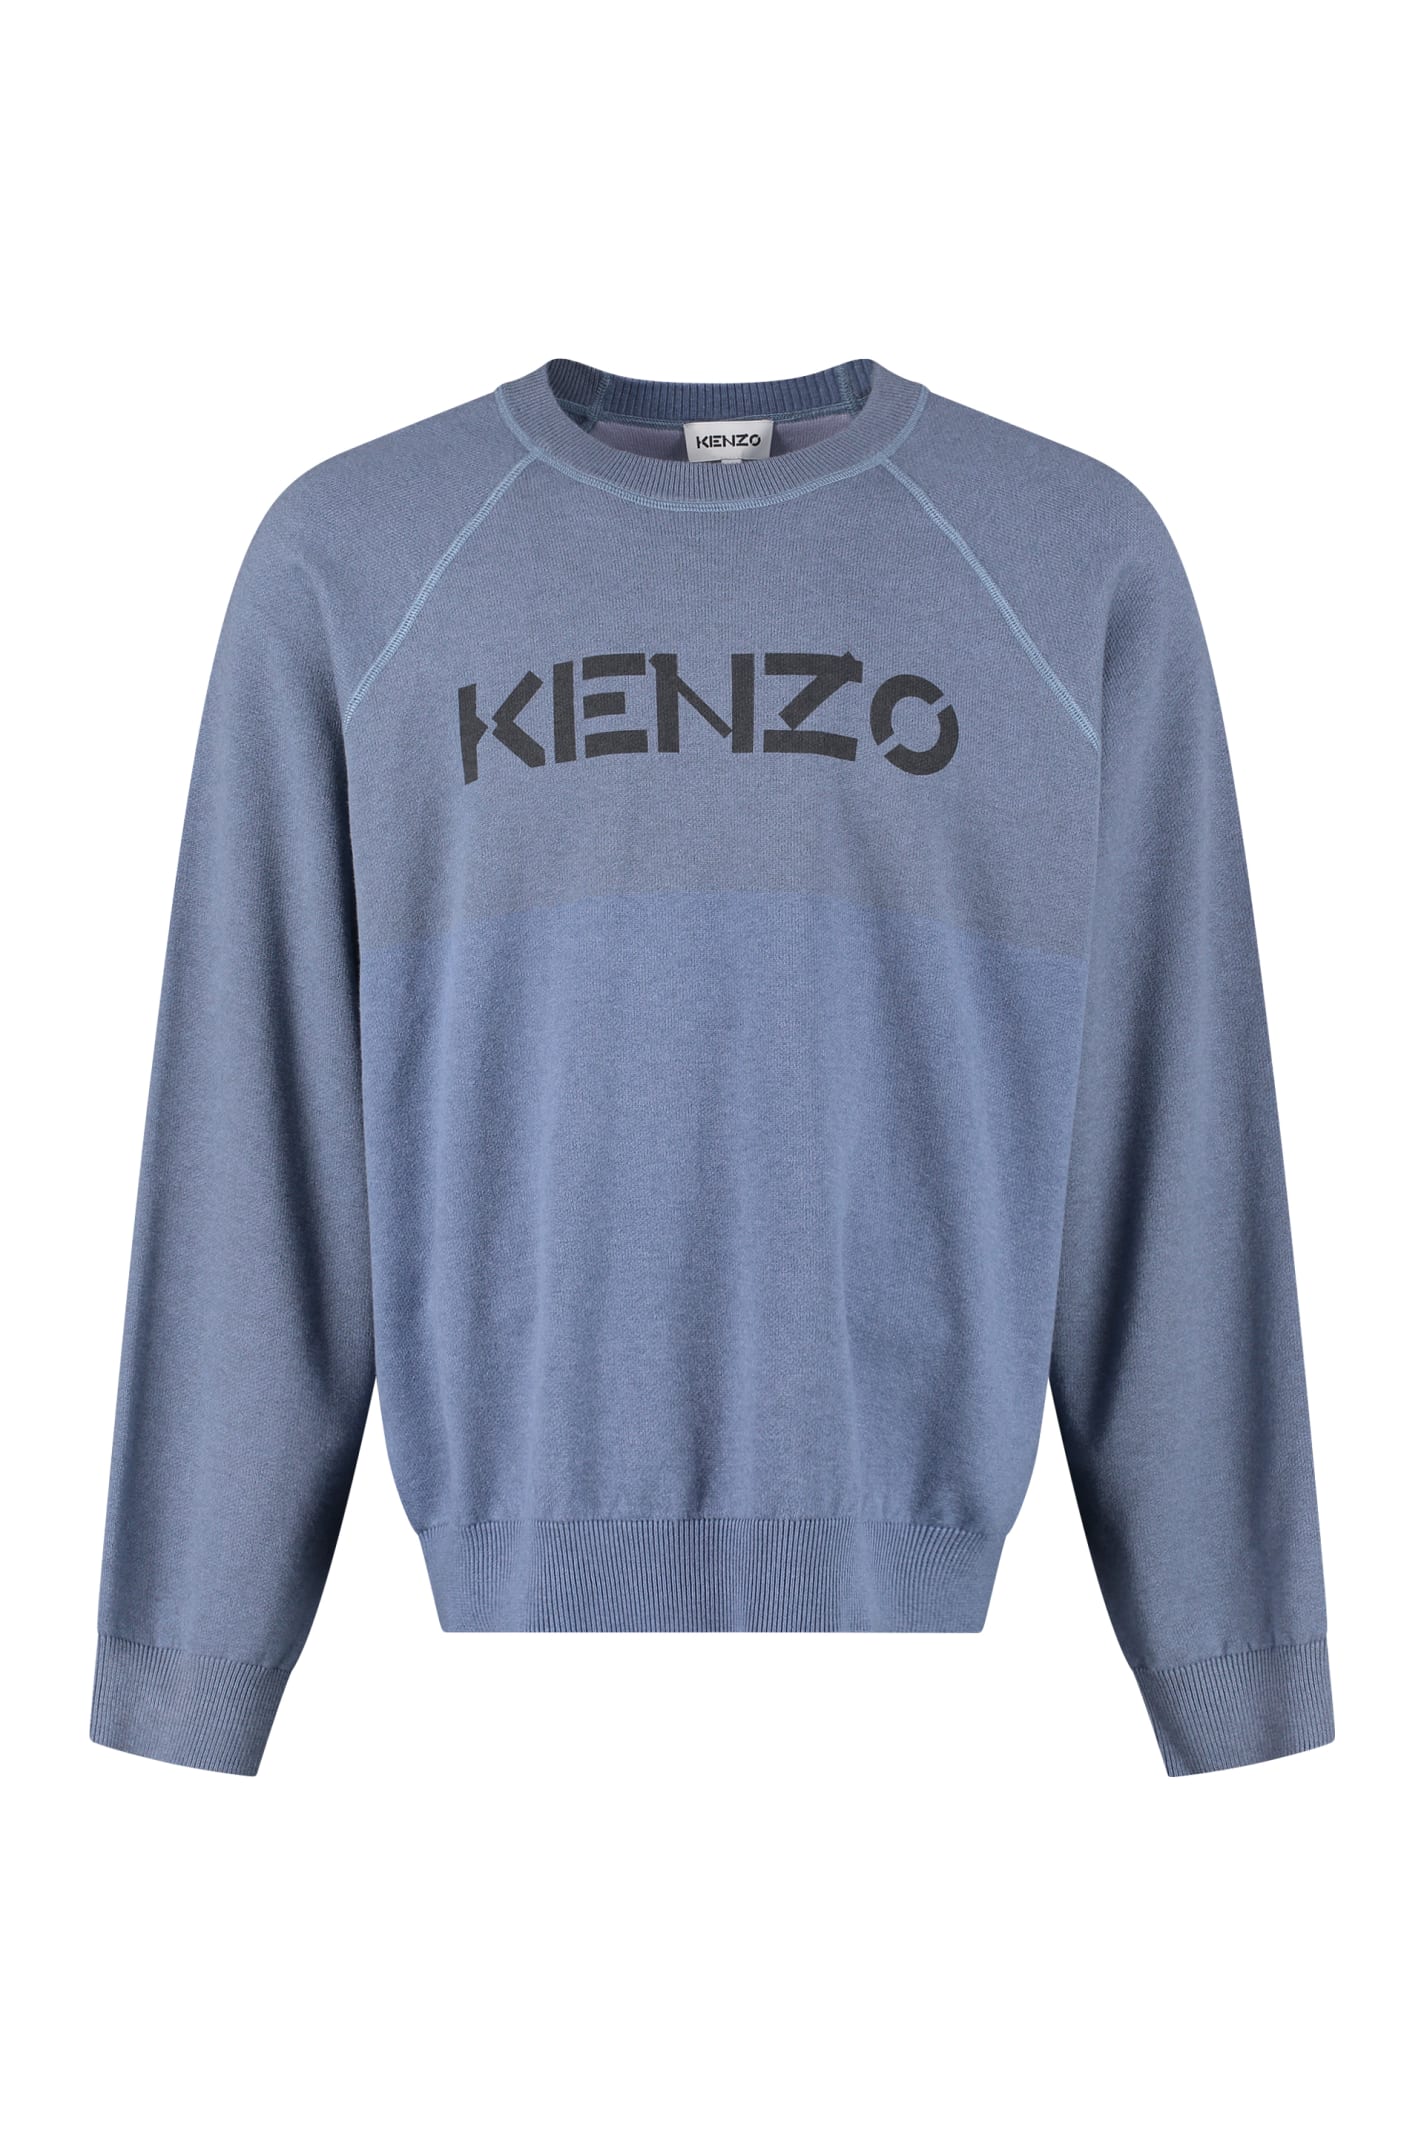 Kenzo Wool Blend Pullover